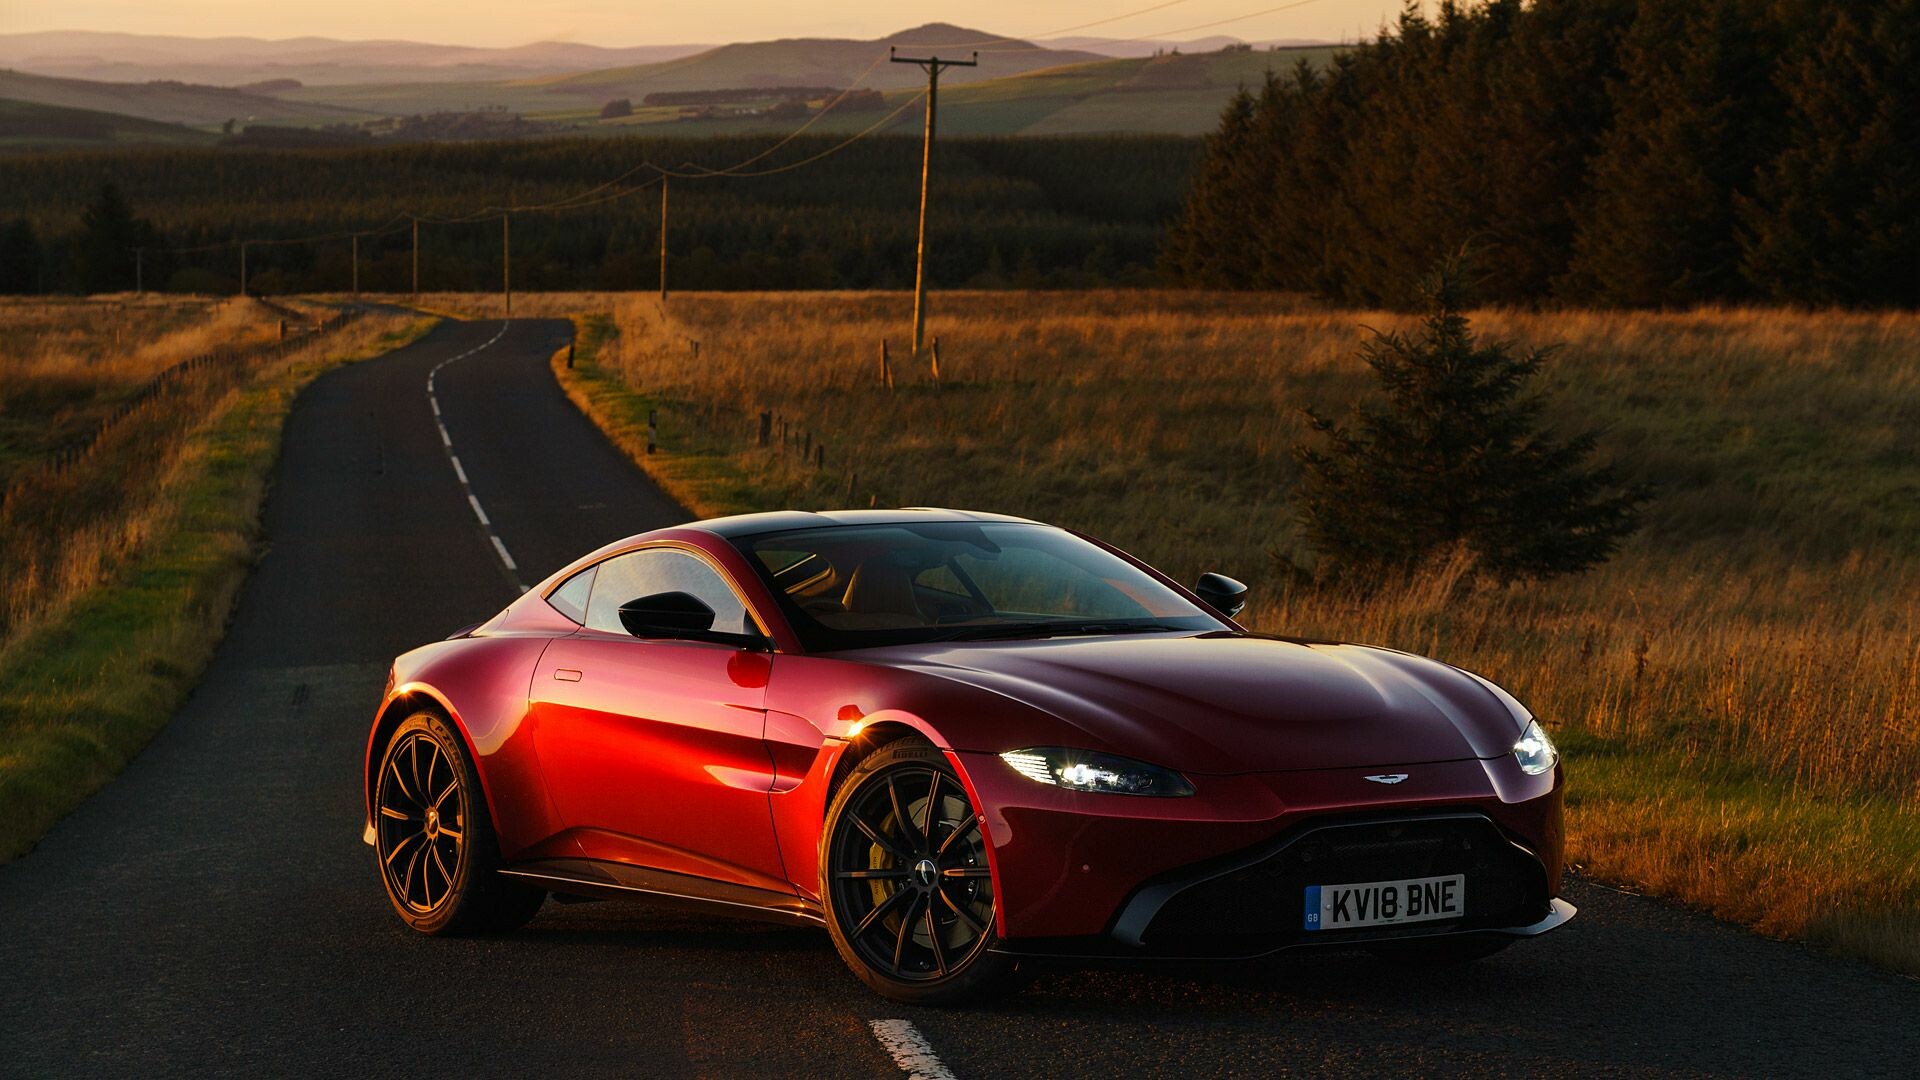 Aston Martin: The brand synonymous with the best of British engineering. 1920x1080 Full HD Background.